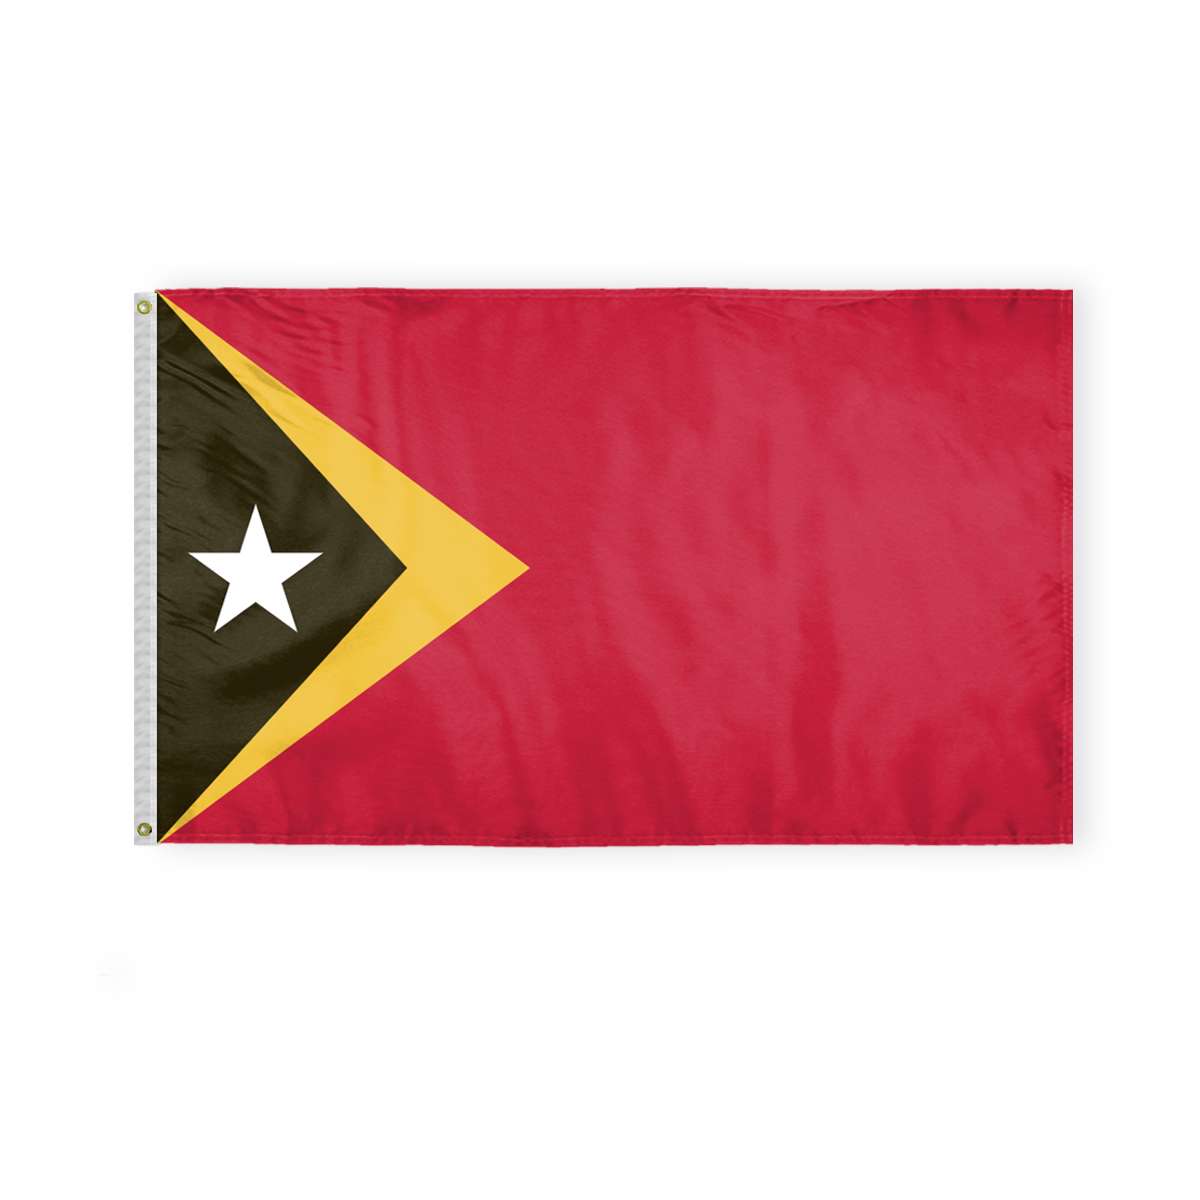 AGAS East Timor Flag 3x5 ft Double Stitched Hem 100% Polyester